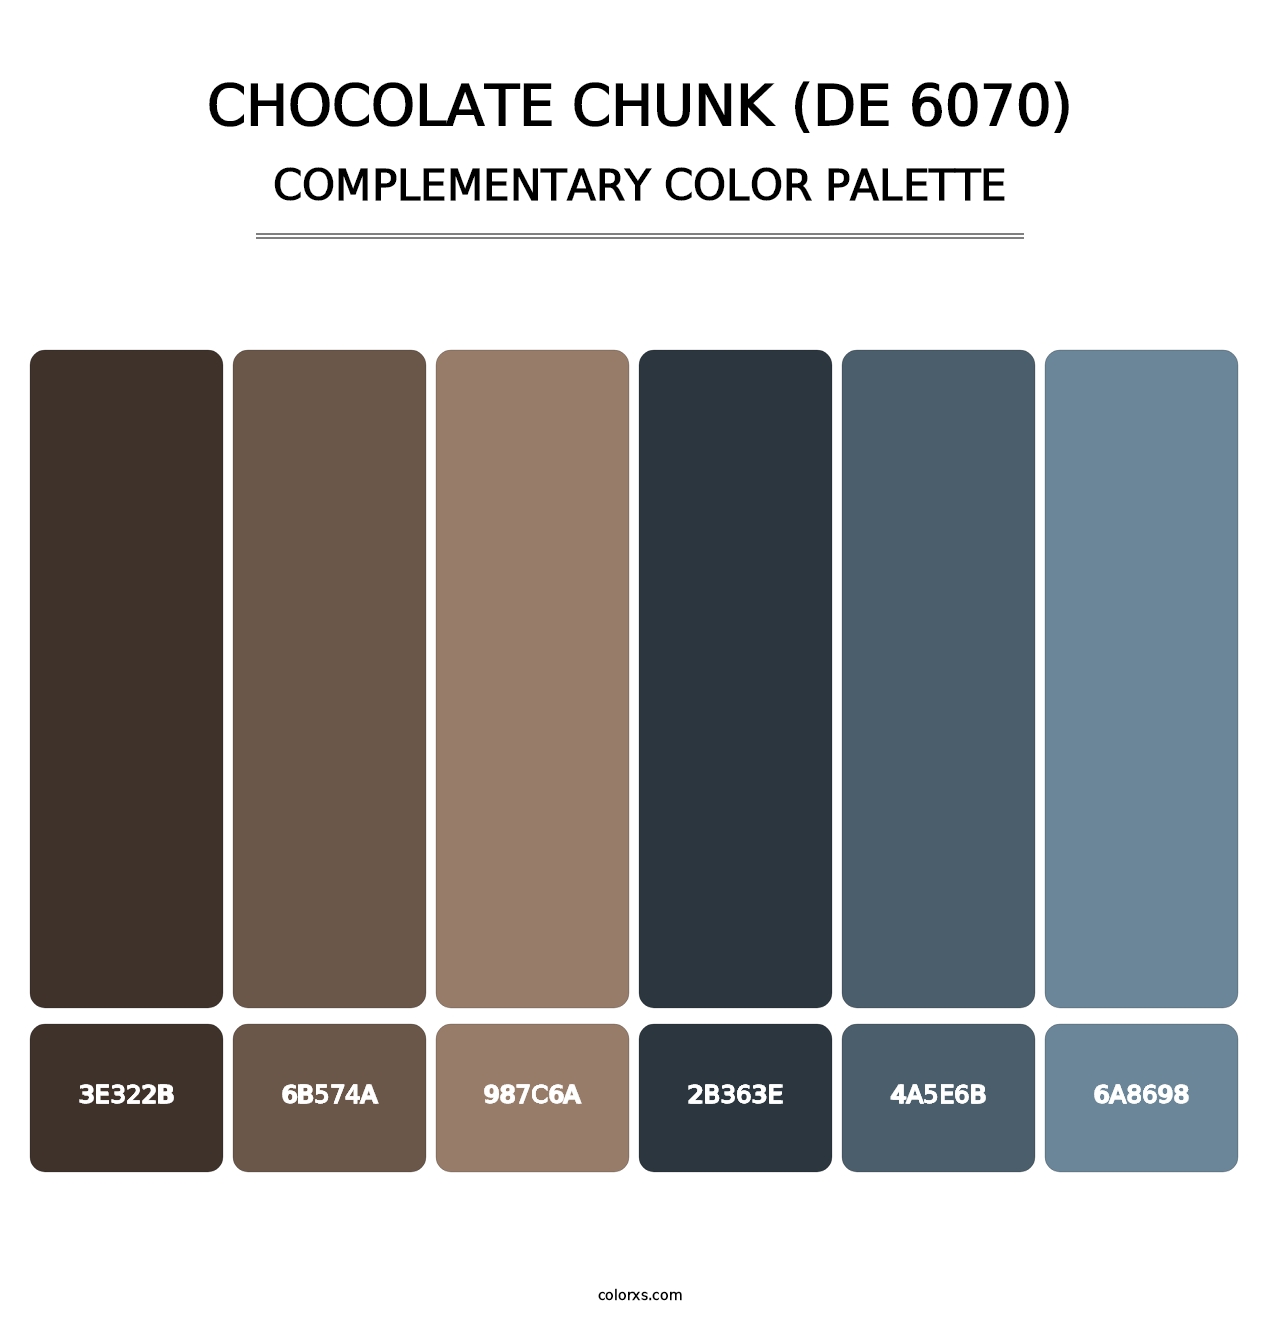 Chocolate Chunk (DE 6070) - Complementary Color Palette